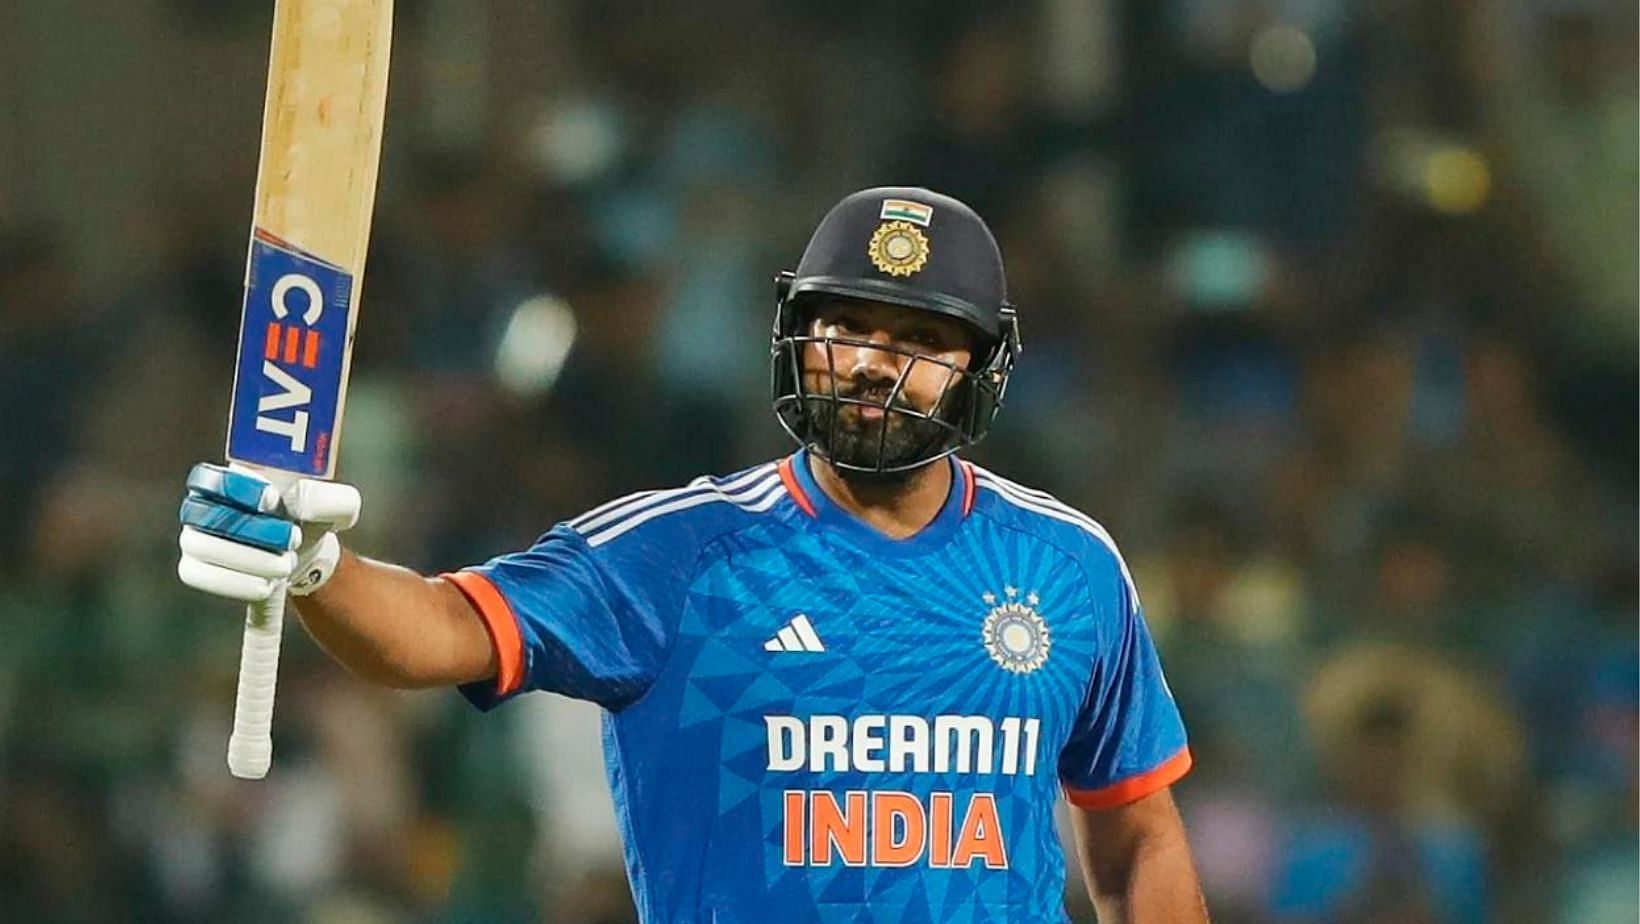 Rohit Sharma scored his 5th century in T20Is.